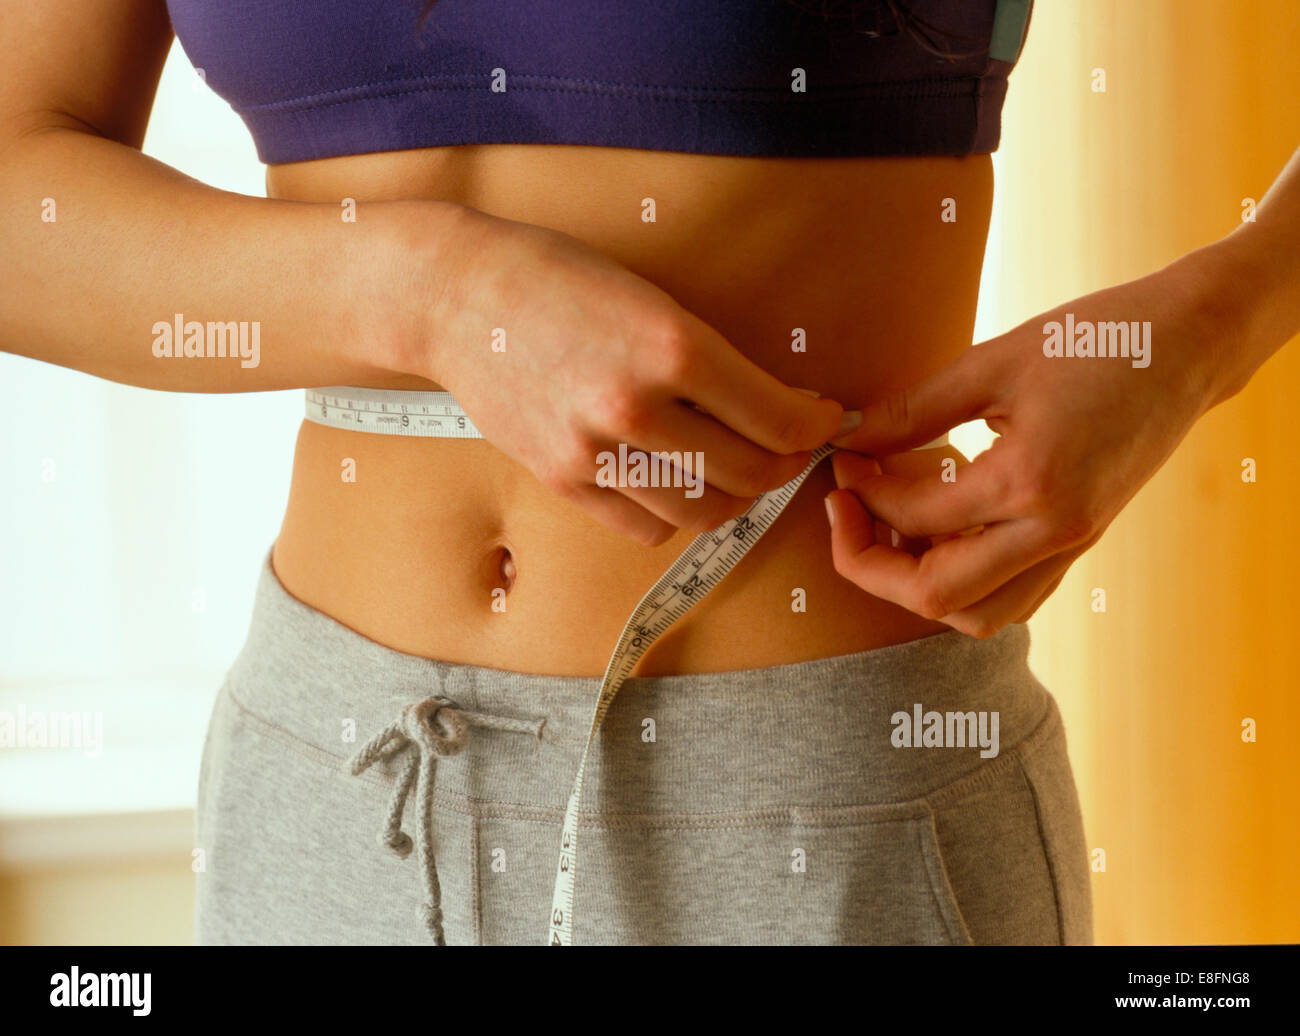 Slim Woman Measuring Waist with Tape Measure Stock Image - Image of beauty,  fitness: 37824873